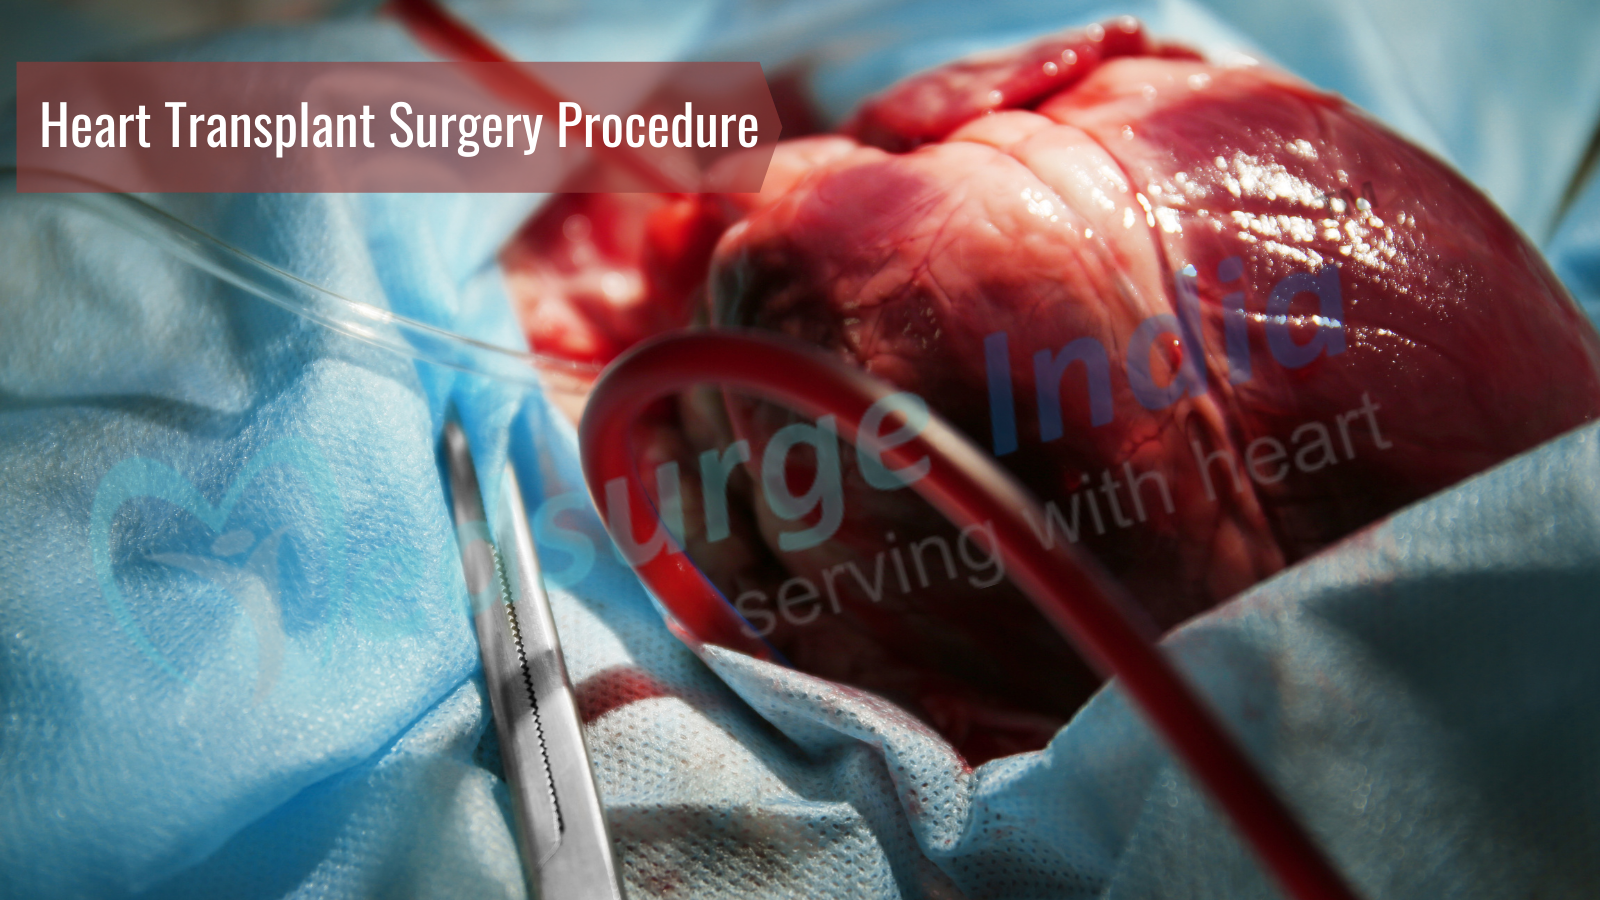 Heart Transplant Surgery – How To Prepare And What To Expect